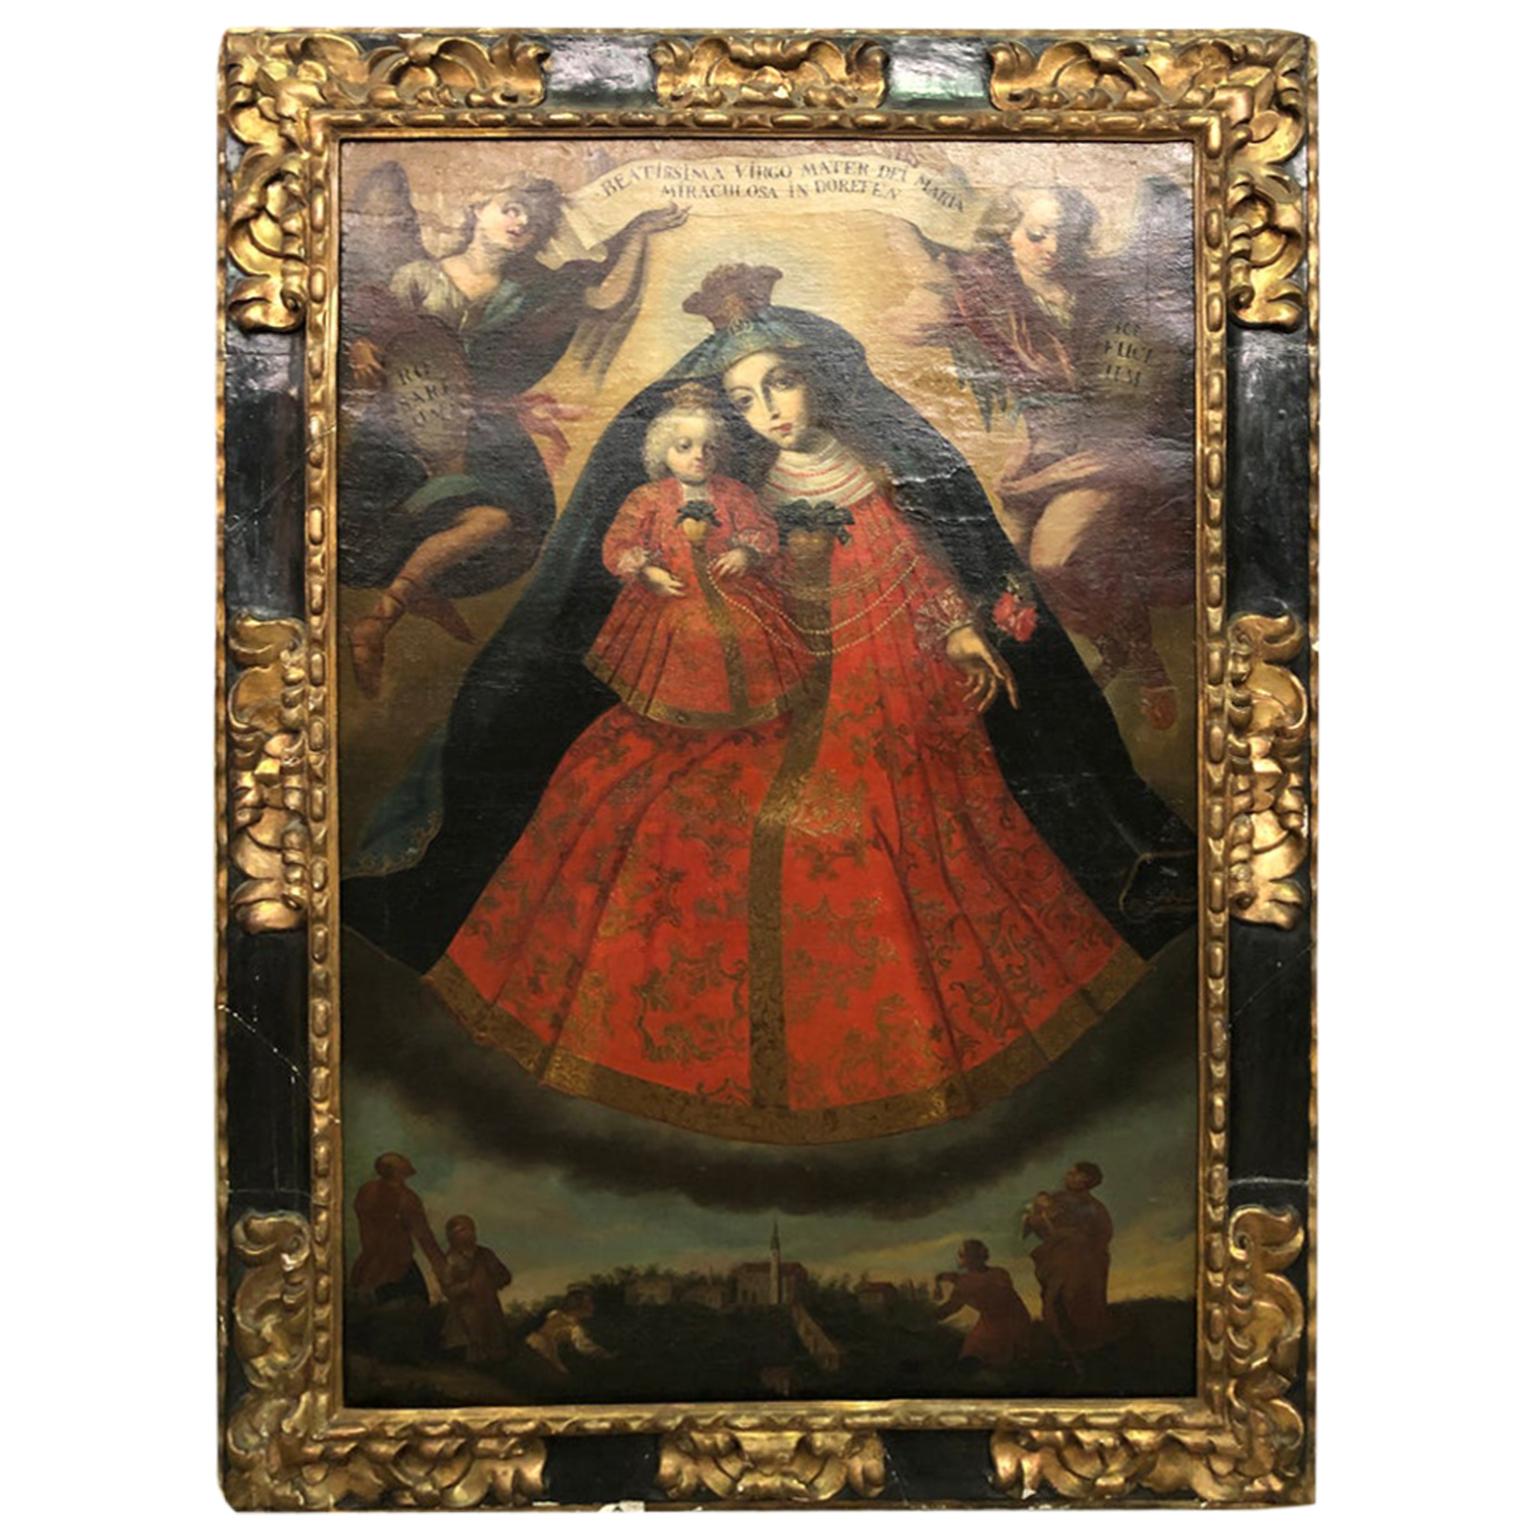 Exquisite and Grand 18th Century Spanish Painting of the Virgin Mary and Child